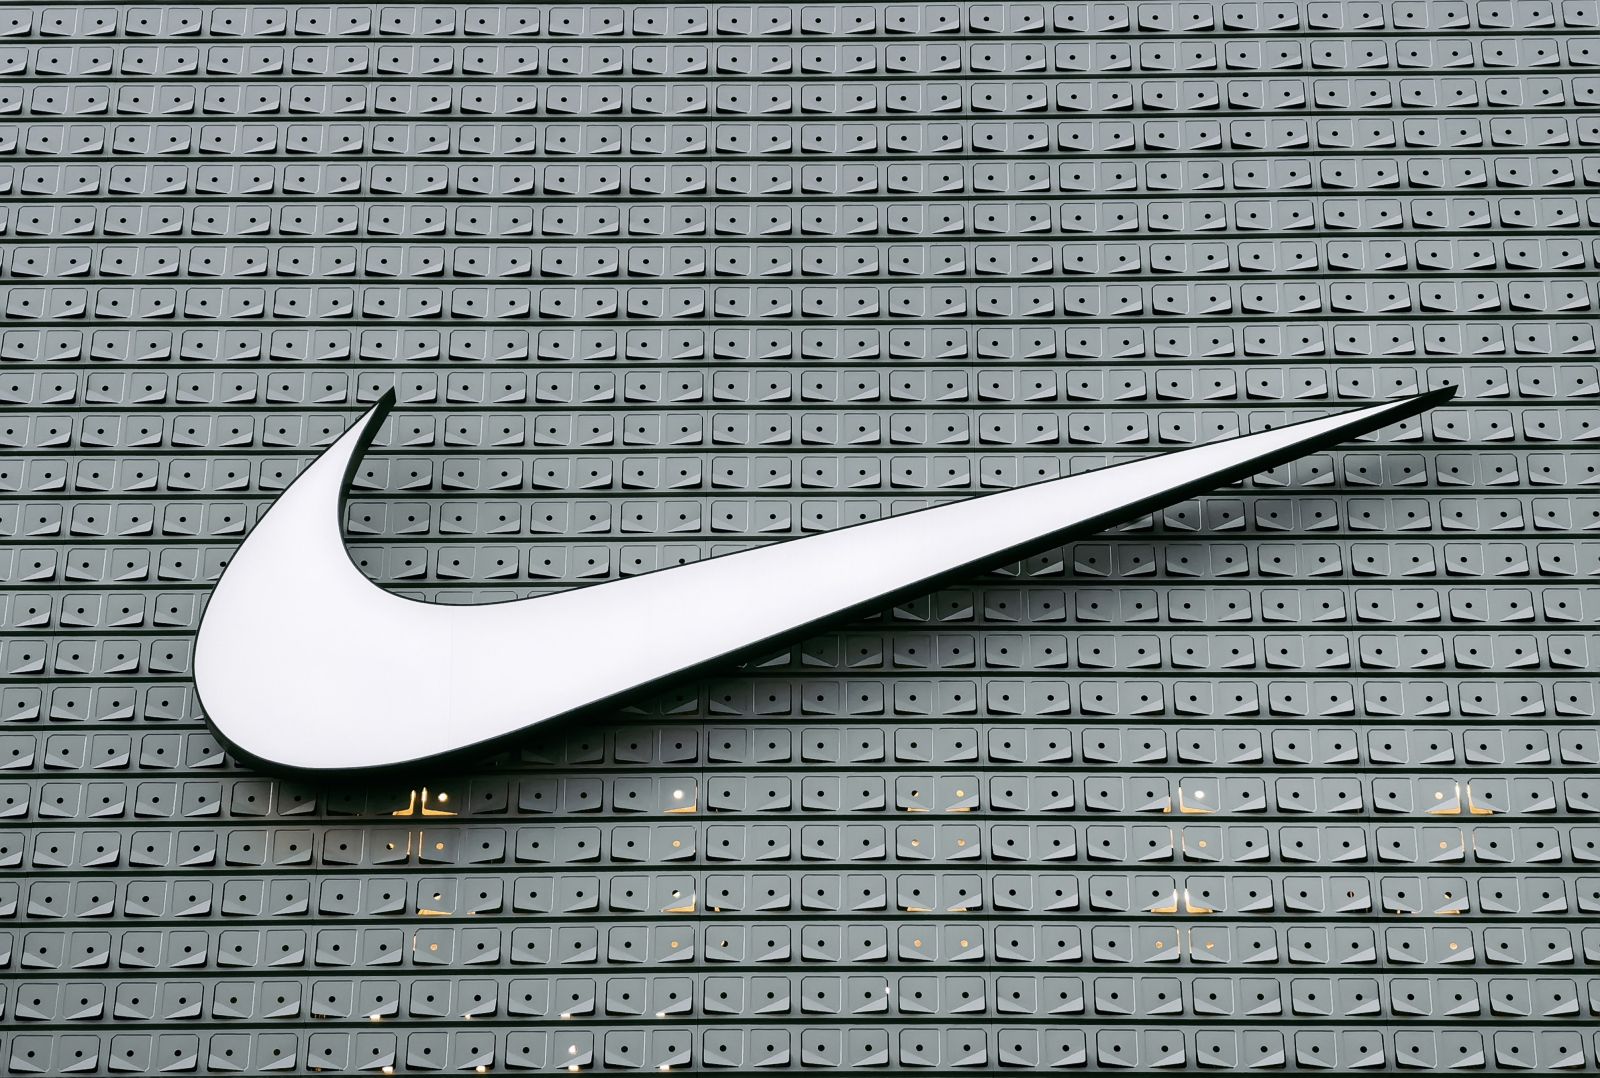 Consumer Products - Nike Swoosh on Building